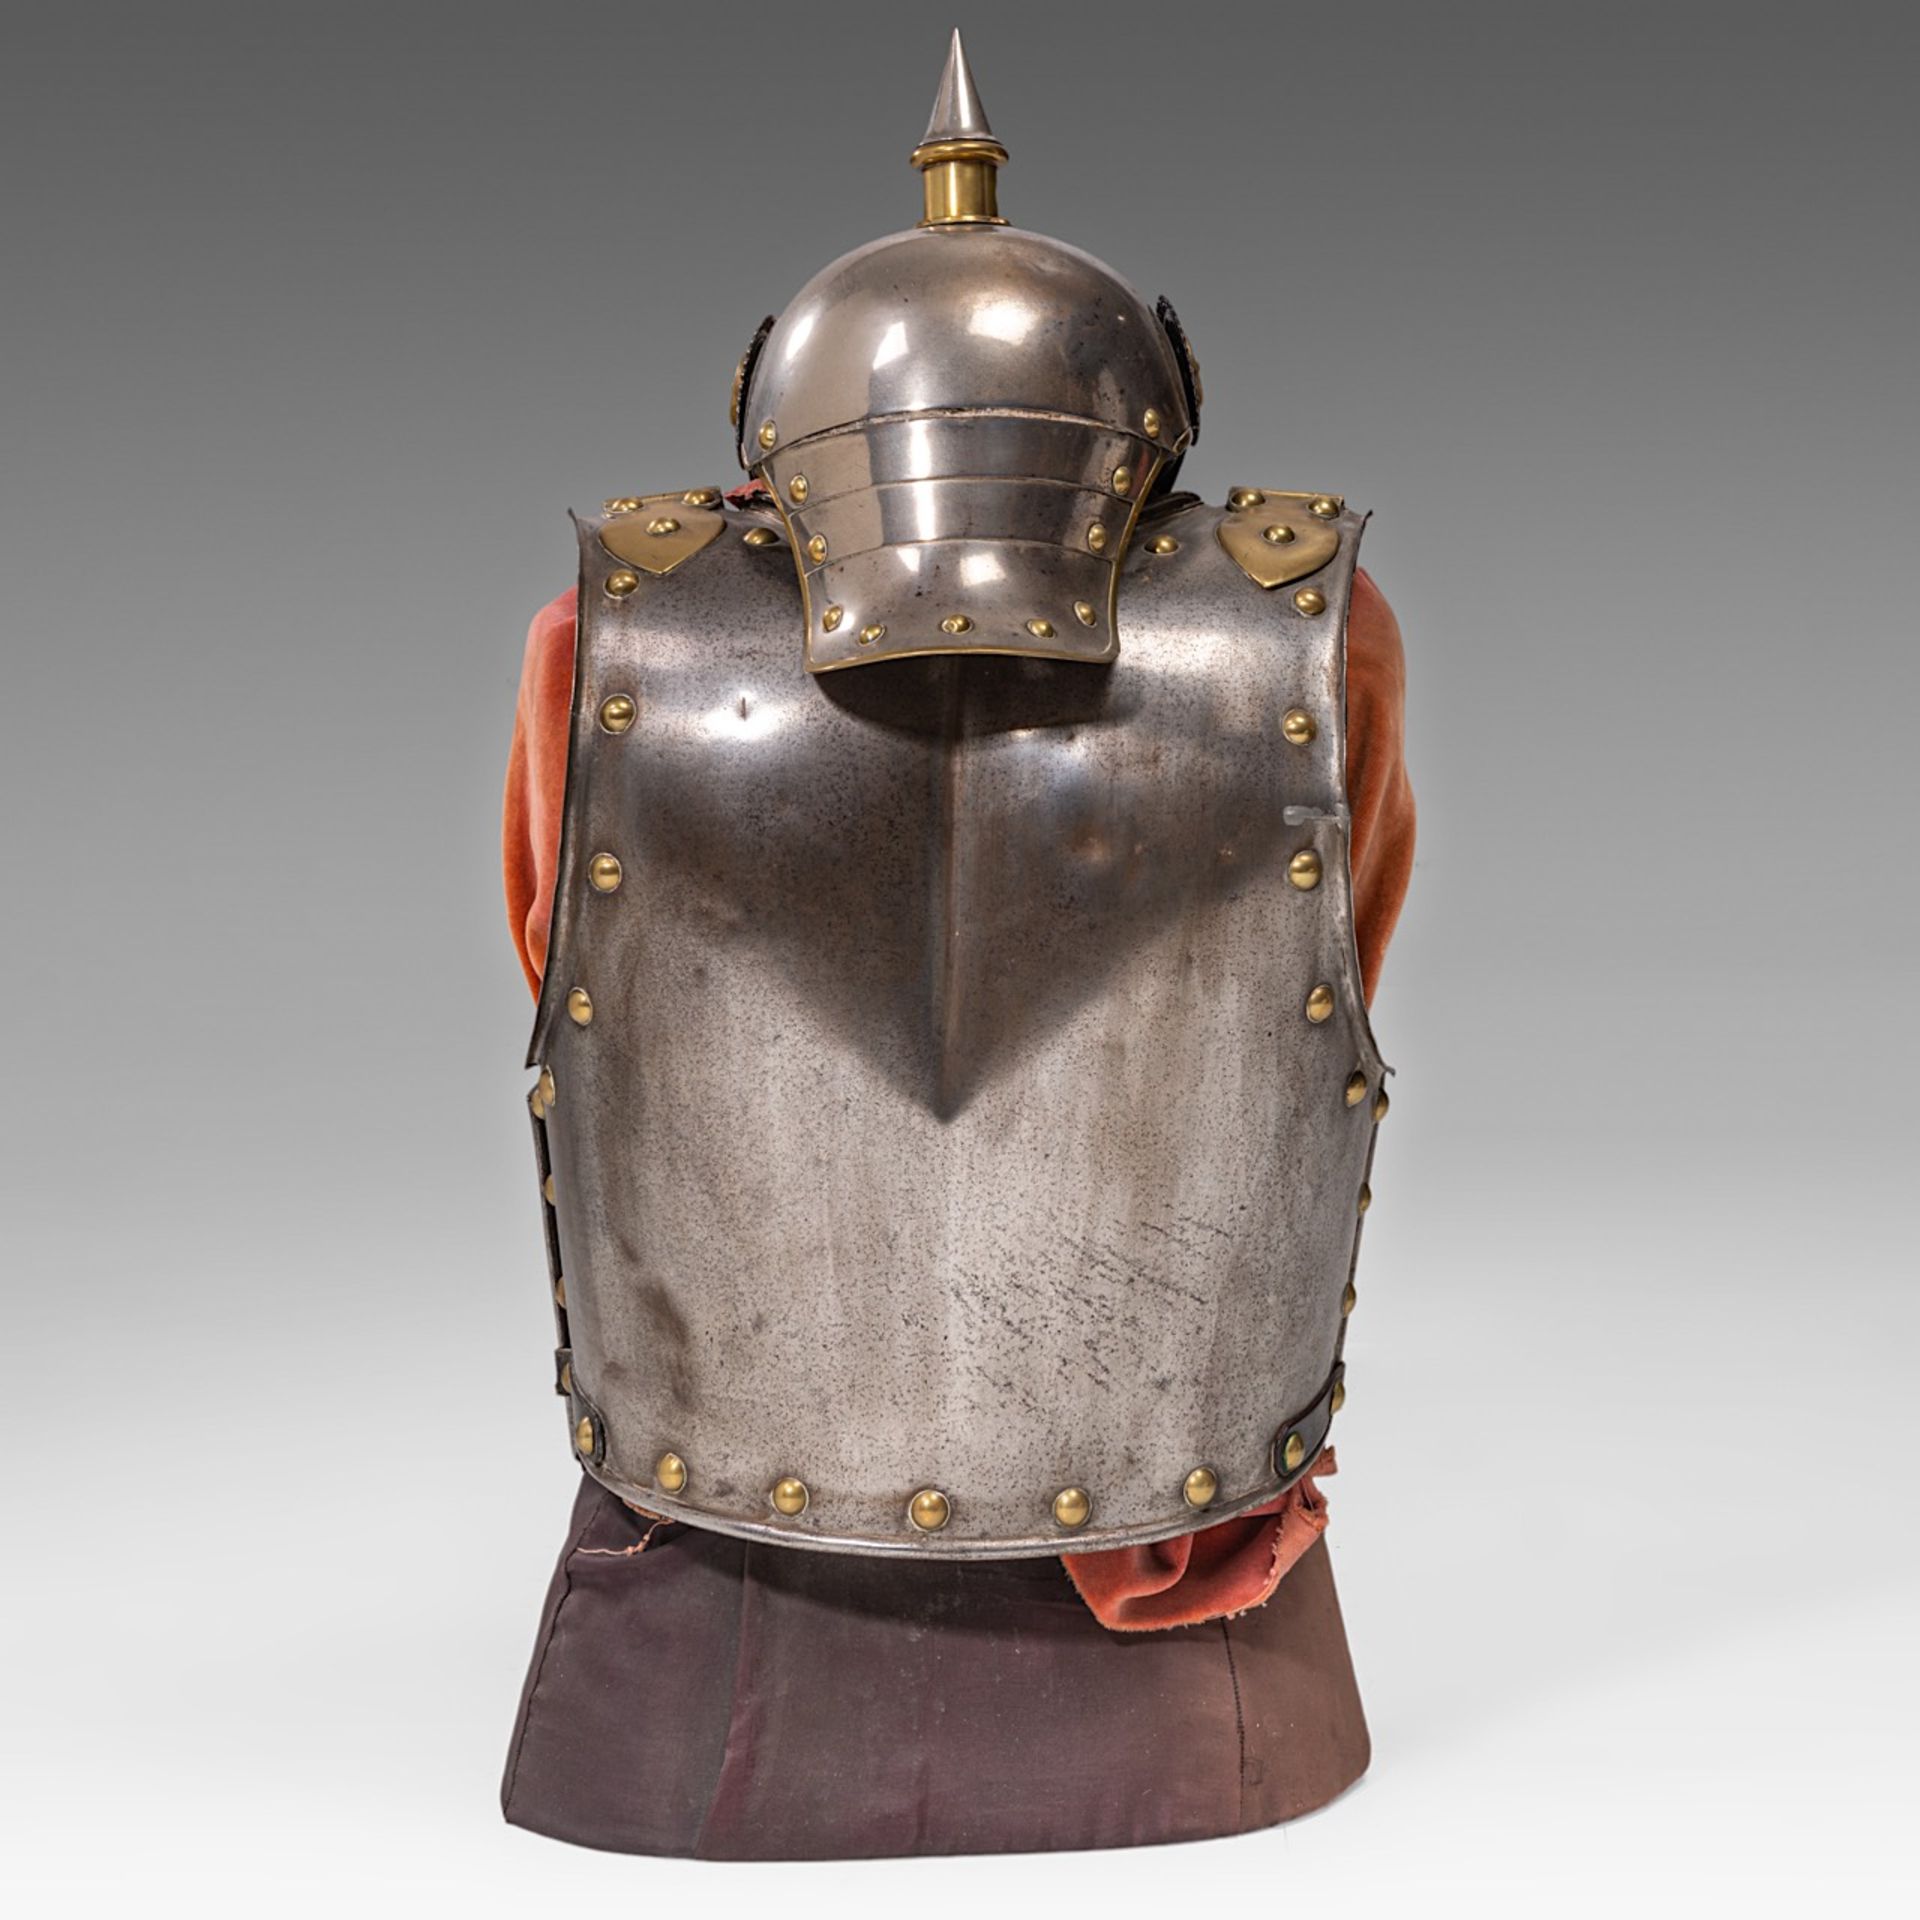 Cuirass and helmet, metal and gilded brass, 19thC., 68 x 30 x 36 cm. (26.7 x 11.8 x 14.1 in.) - Image 5 of 8